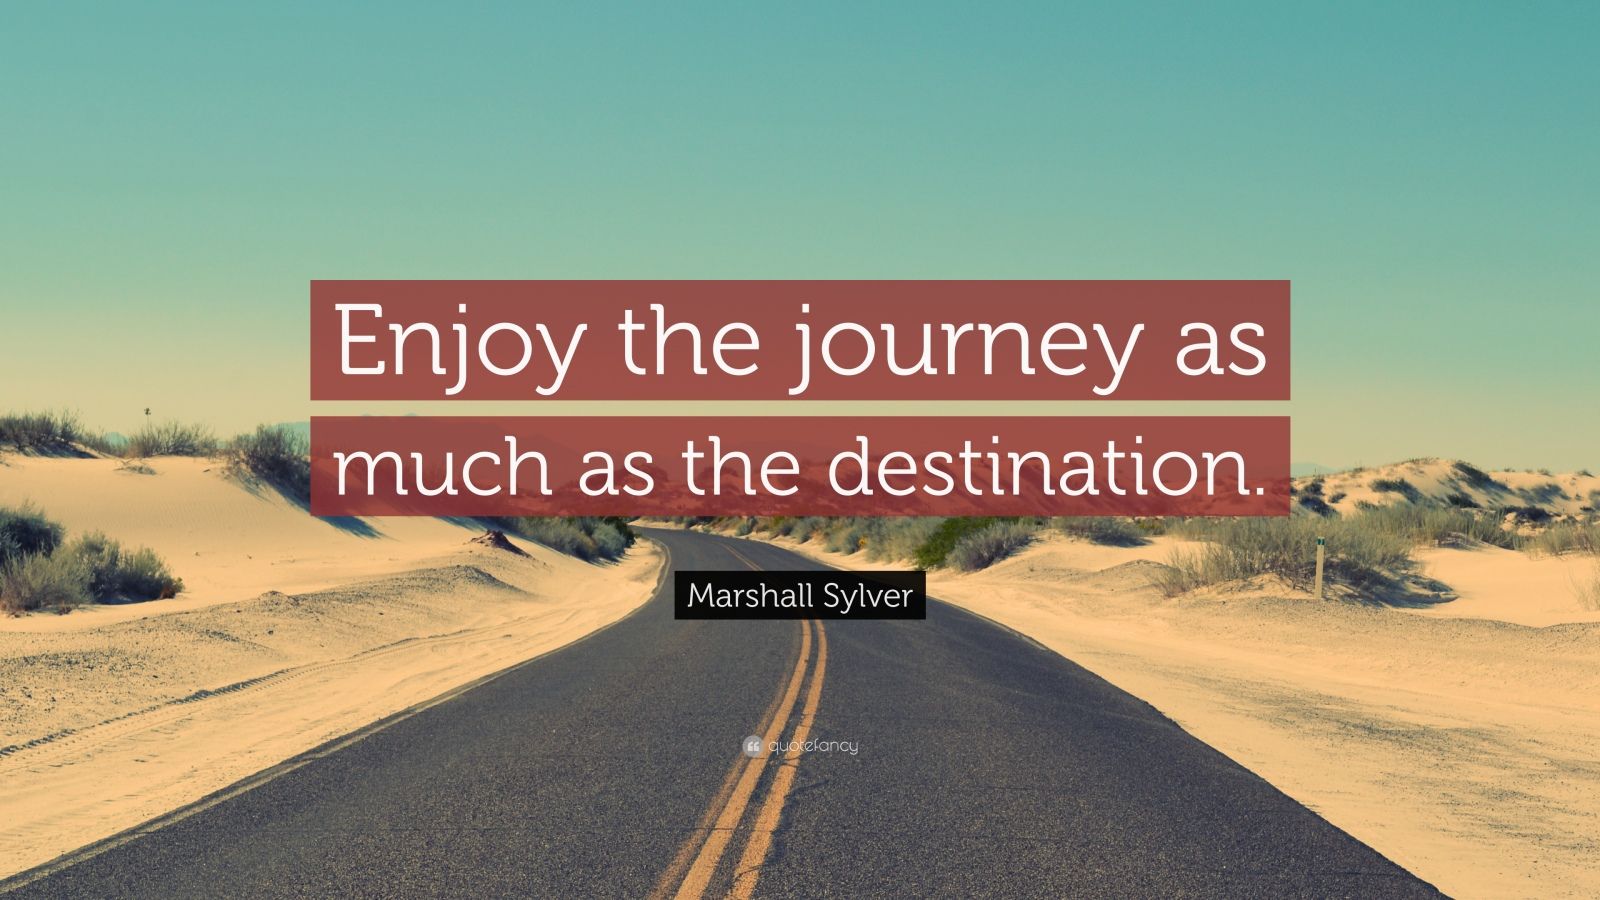 enjoy the journey as much as the destination